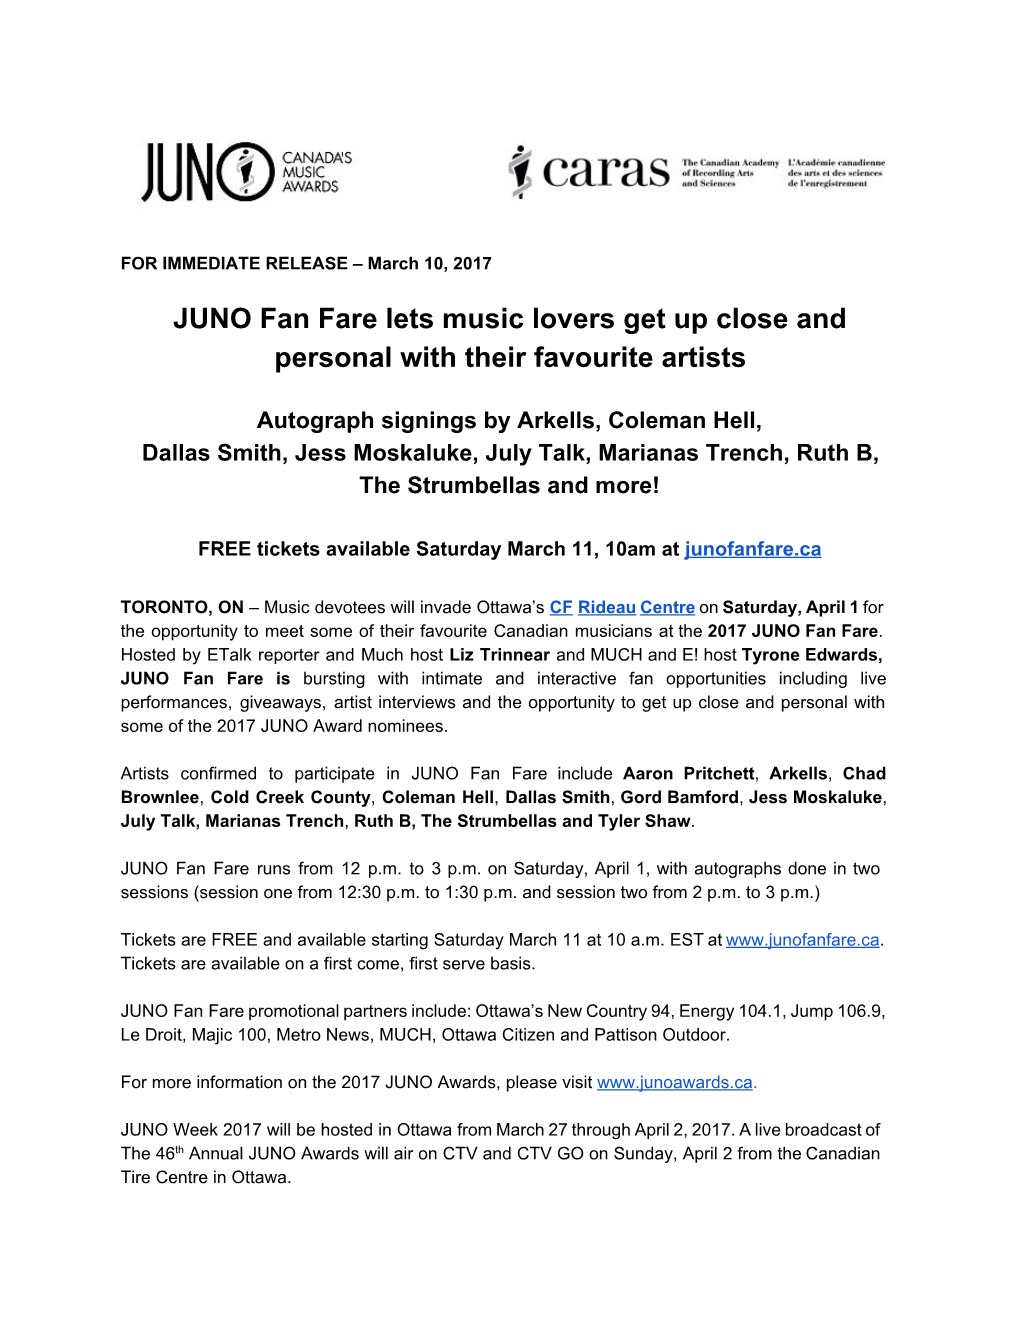 JUNO Fan Fare Lets Music Lovers Get up Close and Personal with Their Favourite Artists